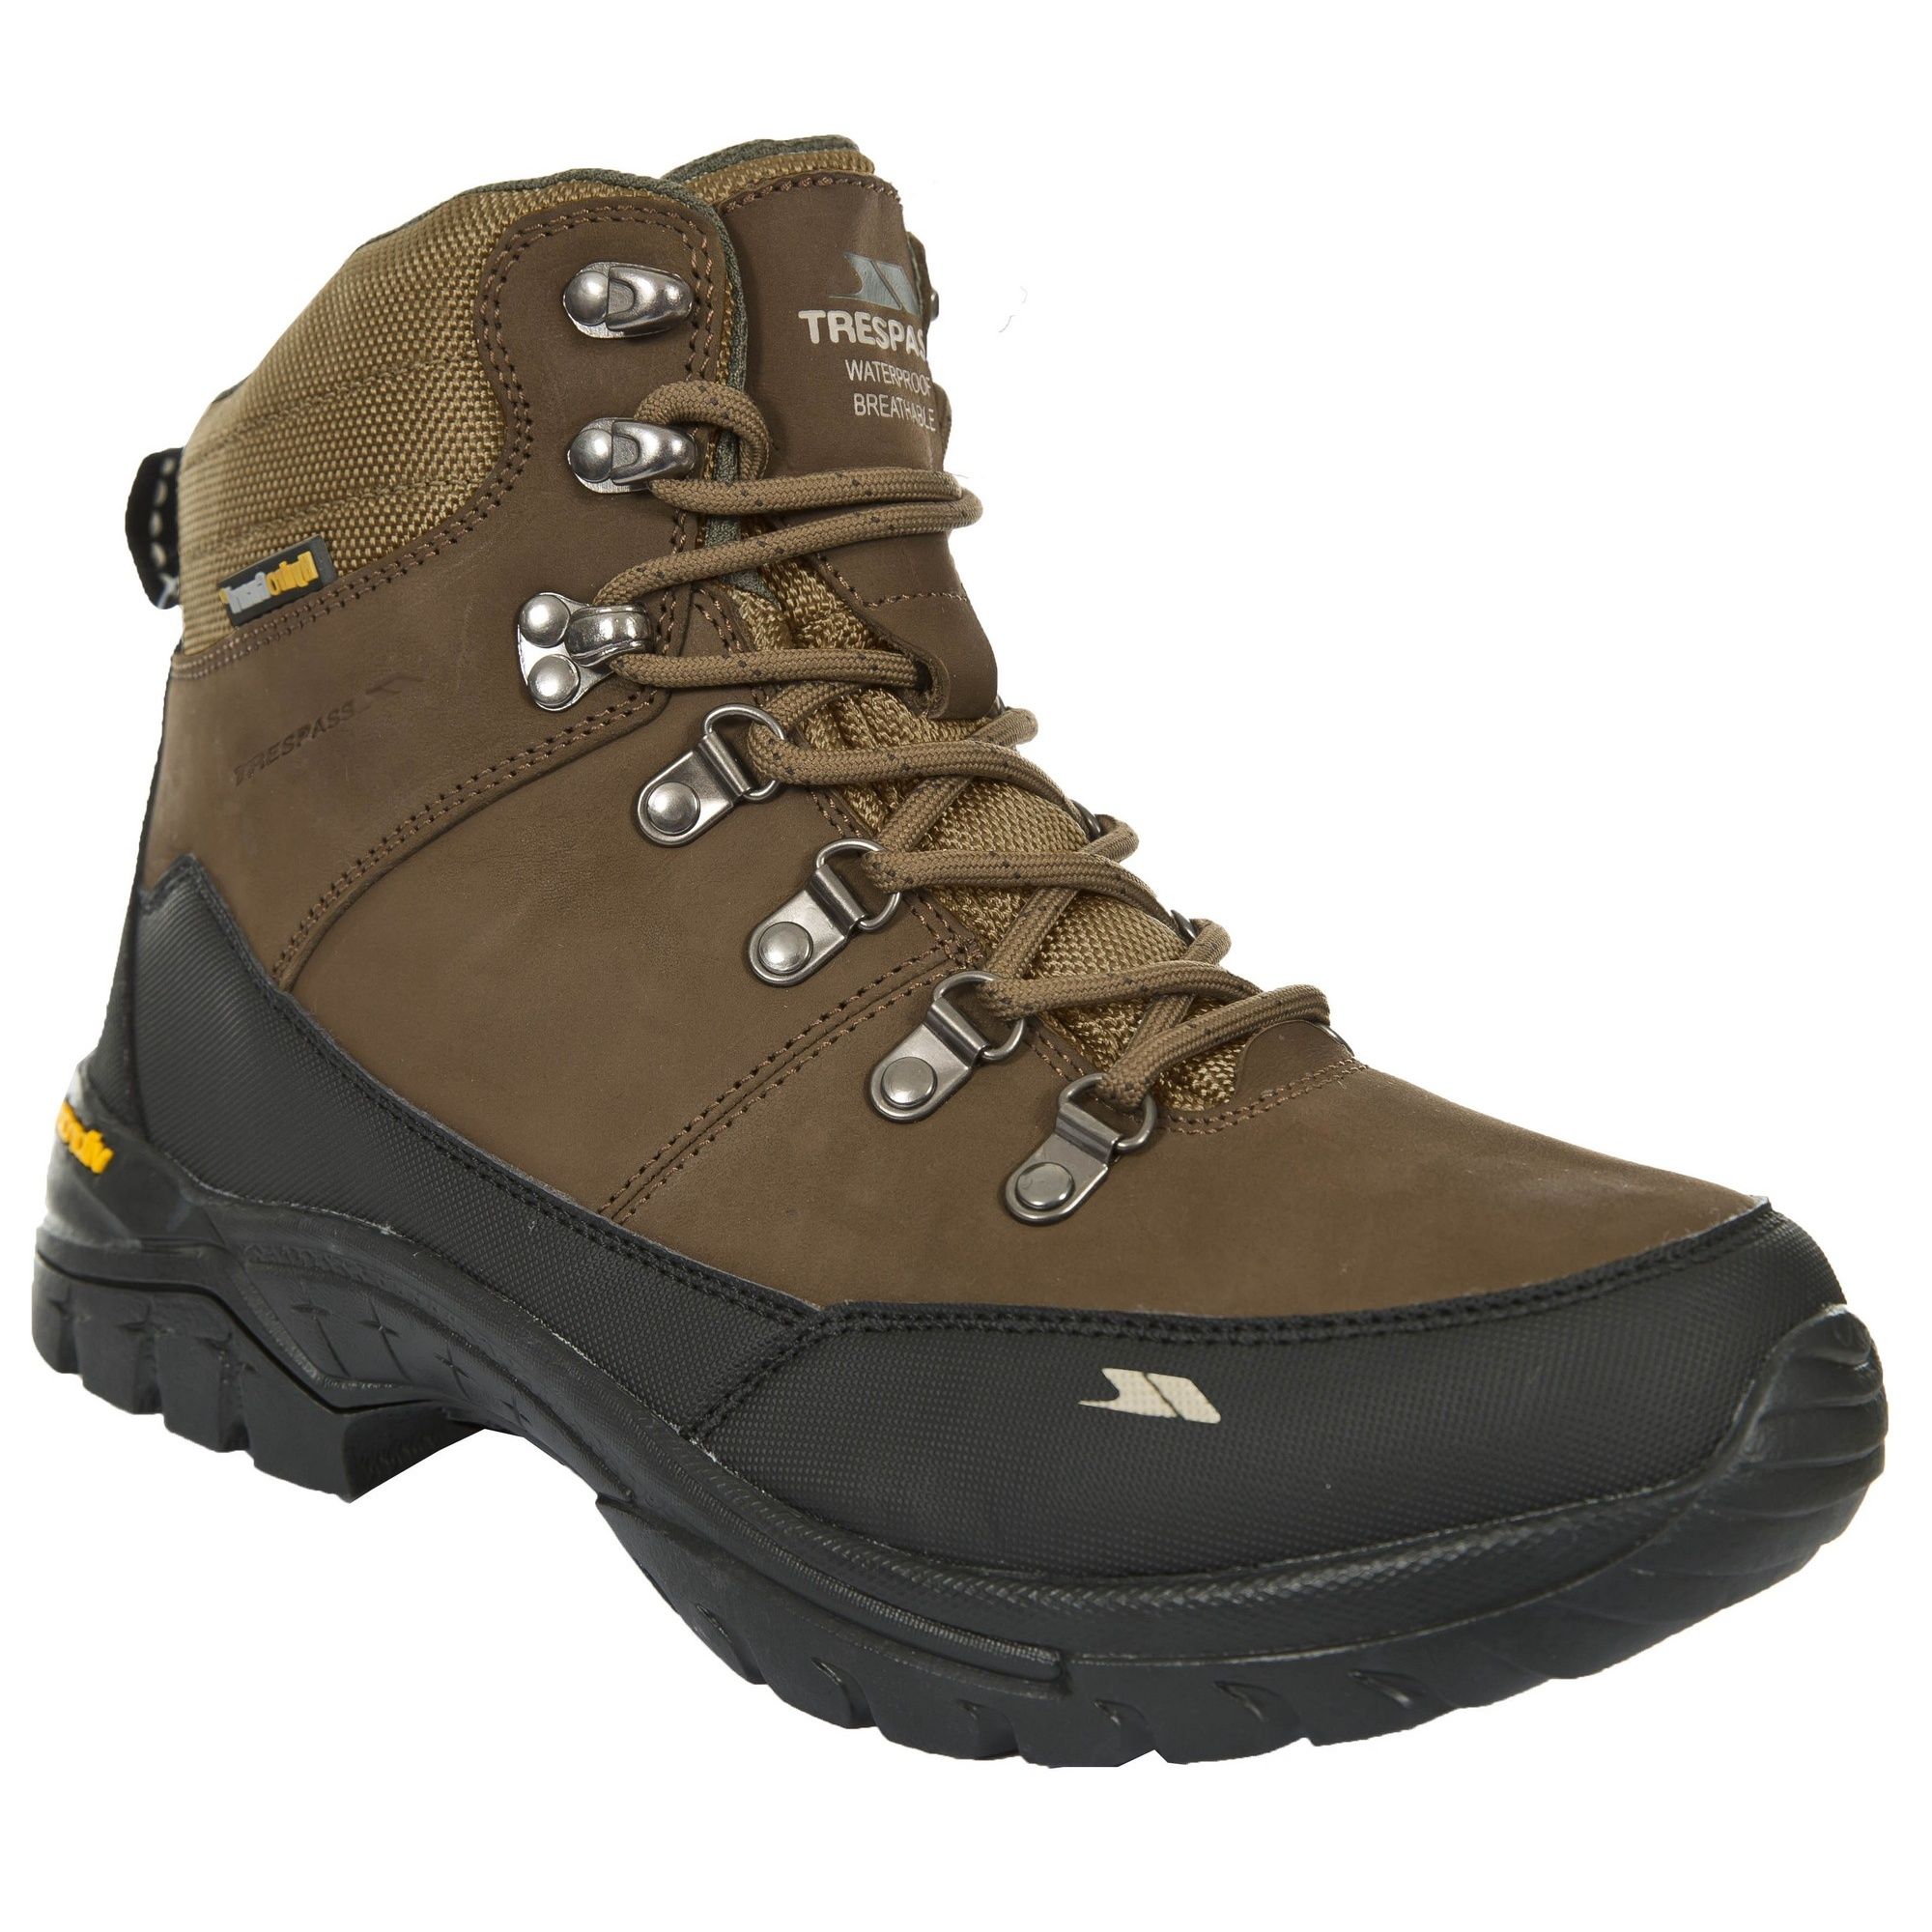 Mens hiking boots. Waterproof. Mid cut. Breathable. Gusseted tongue. Protective and durable all-round mudguard. Ankle supportive cushioned collar and tongue. Arch stabilising. Supportive shank. Cushioned footbed. Durable traction outsole. Lace up. Upper: Nubuck Leather/Mesh/PU. Lining: Textile. Outsole: Rubber.